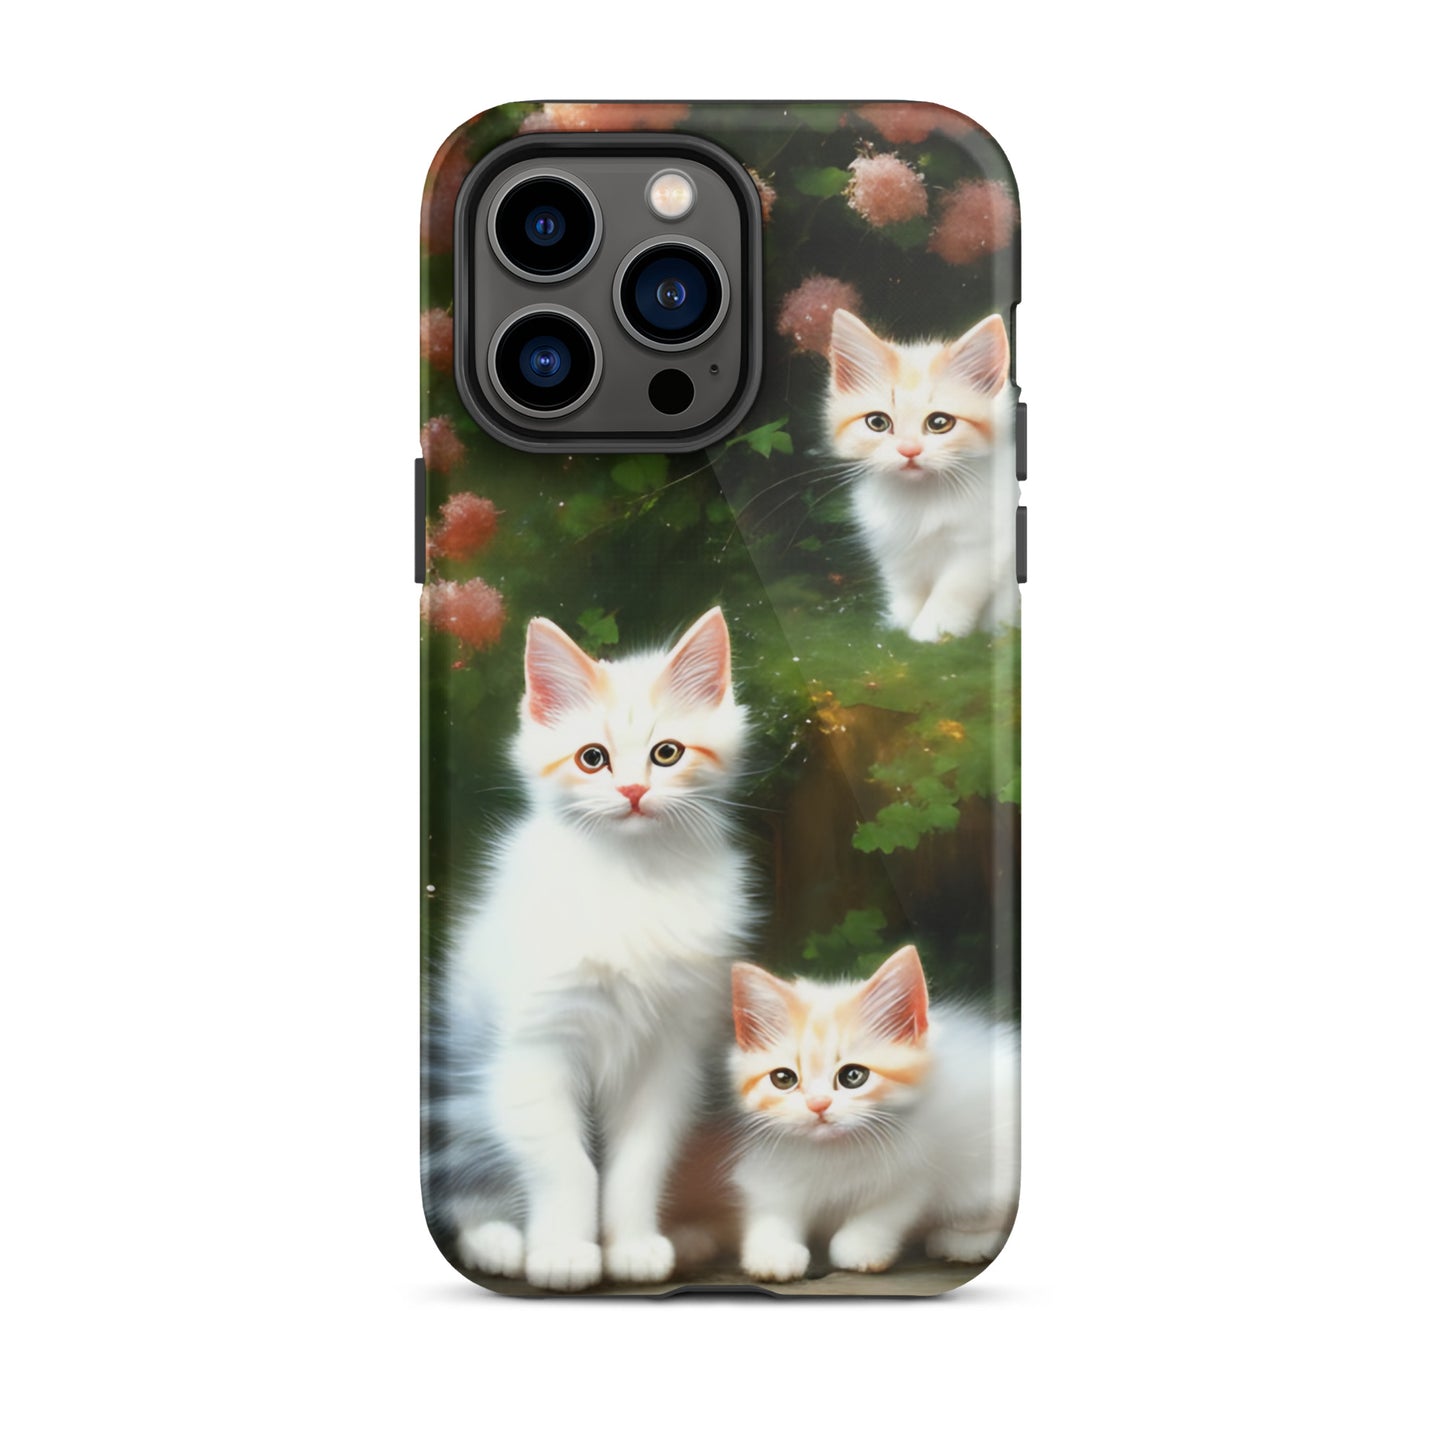 A picture of a iphone tough case with 3 fluffy white and orange kittens and peach colored flowers in the background - glossy-iphone-14-pro-max-front